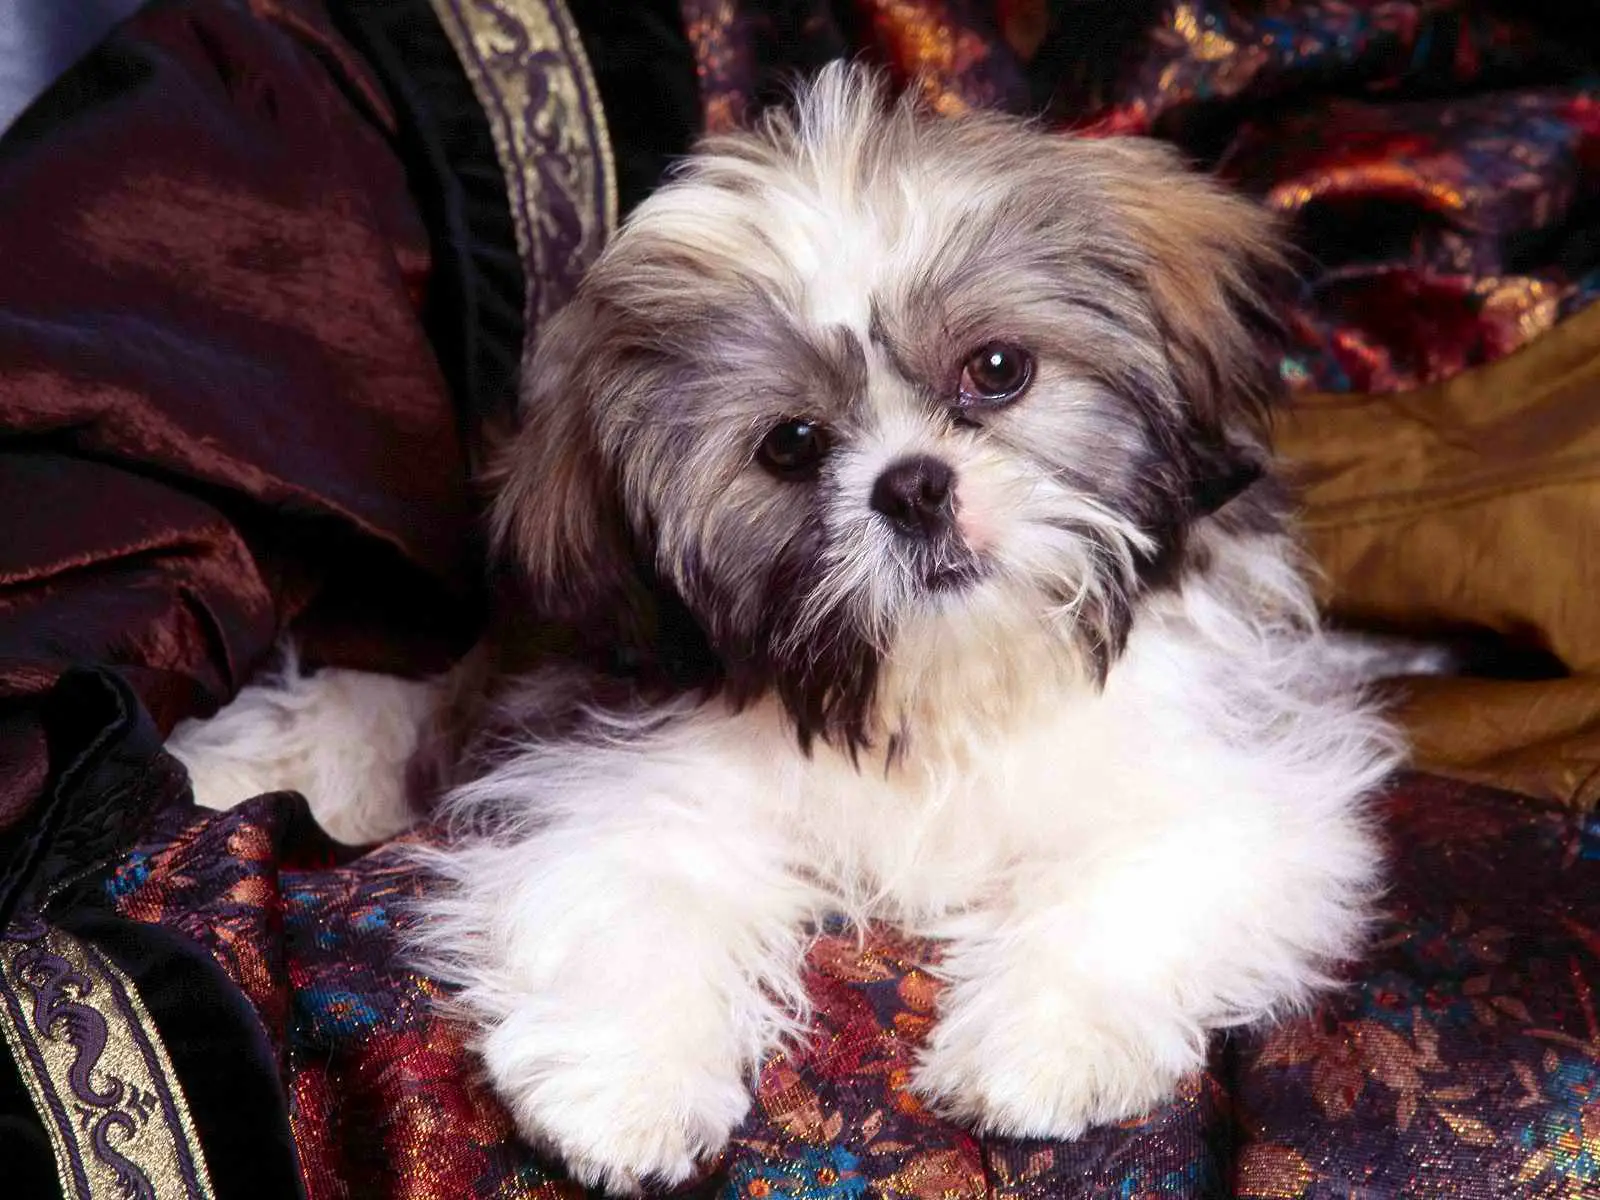 1356715372~Tricolored-Shih-Tzu-sitting-in-a-brown-couch.jpg